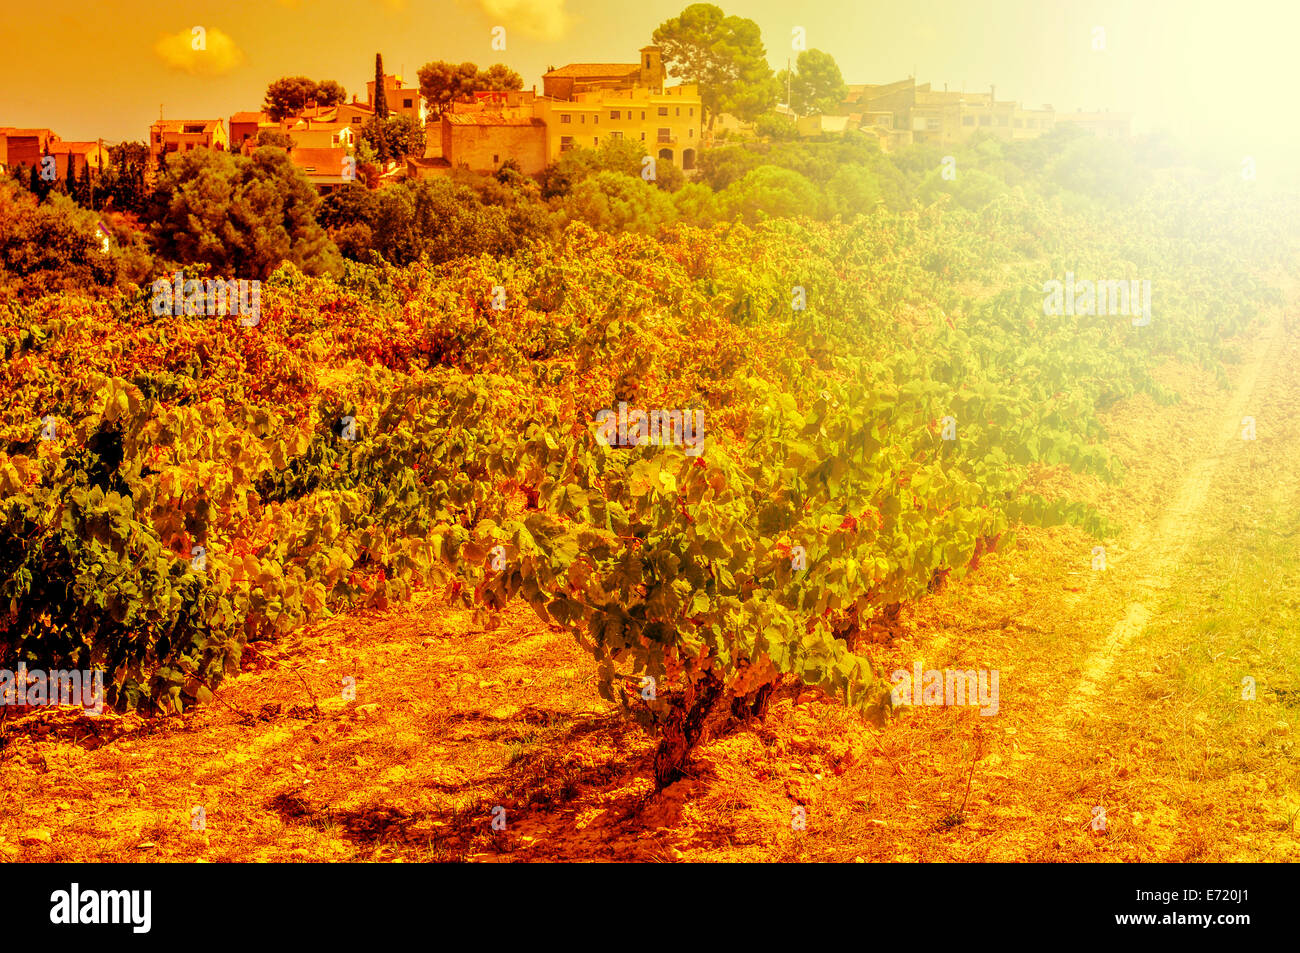 detail of a vineyard in a mediterranean country lit by the evening light Stock Photo